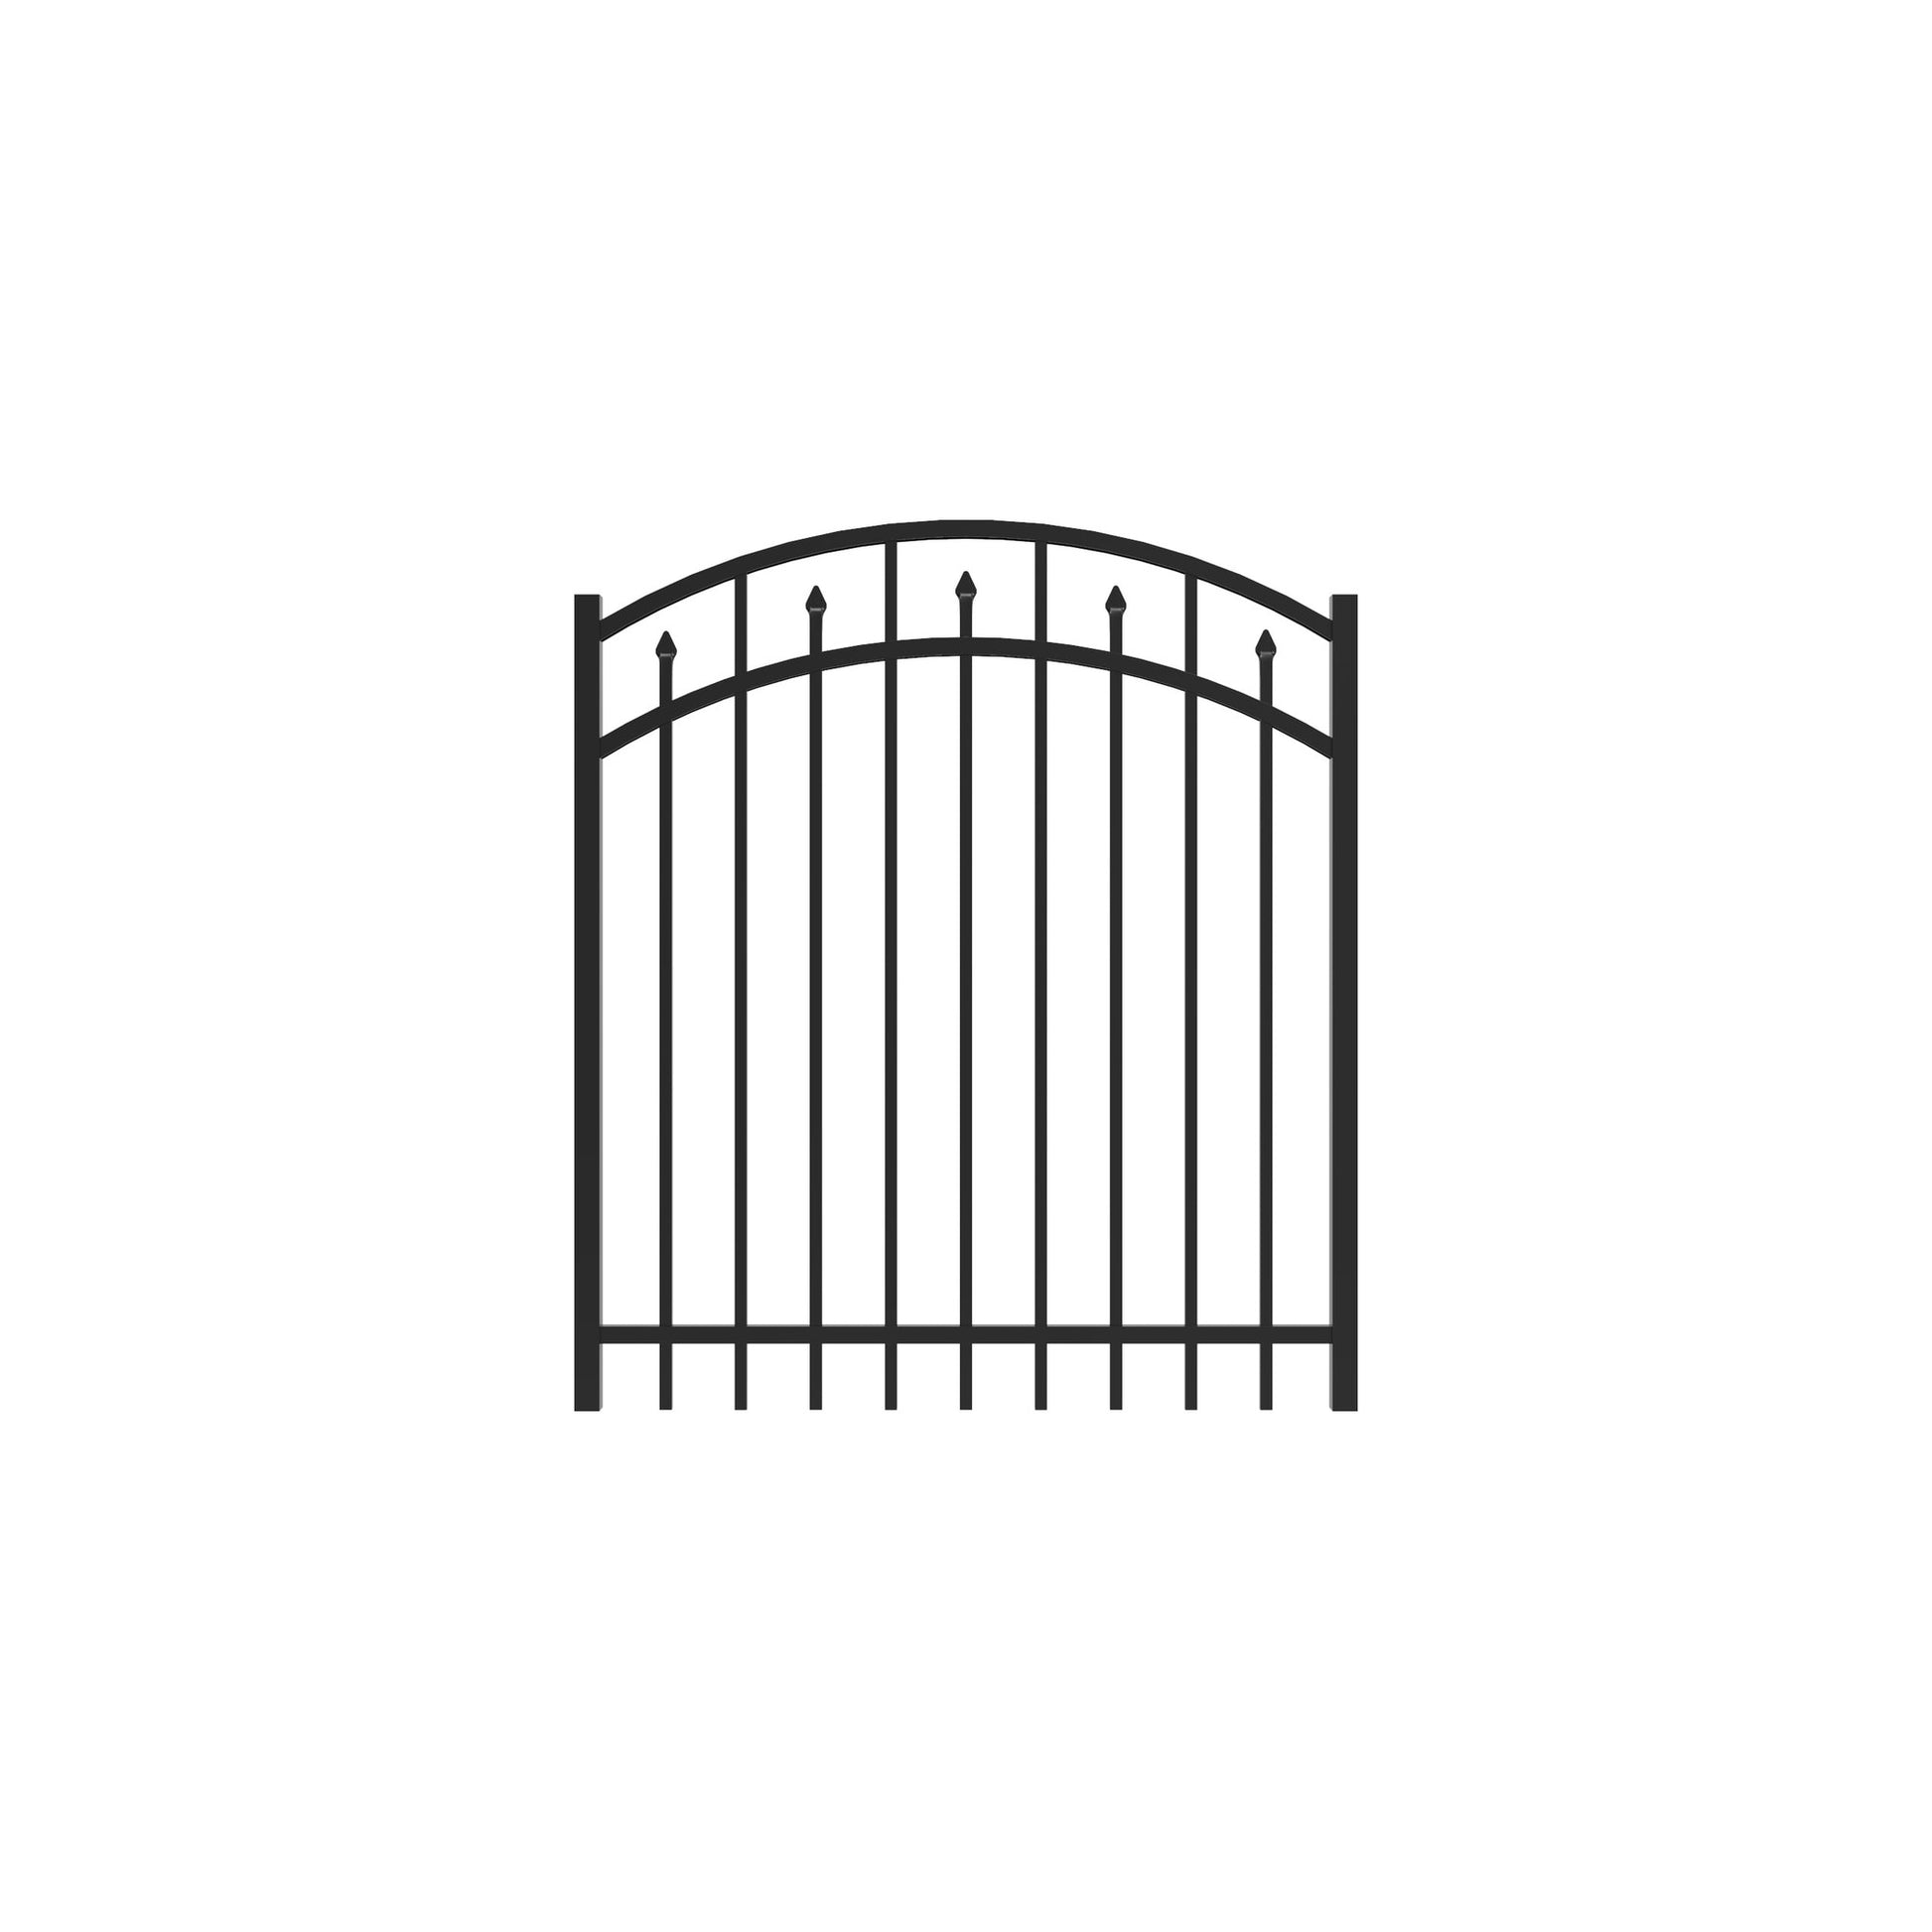 Amethyst Home Series - Arched Gate - 4' x 4'-Aluminum Fence Gates-ActiveYards-Black-FenceCenter